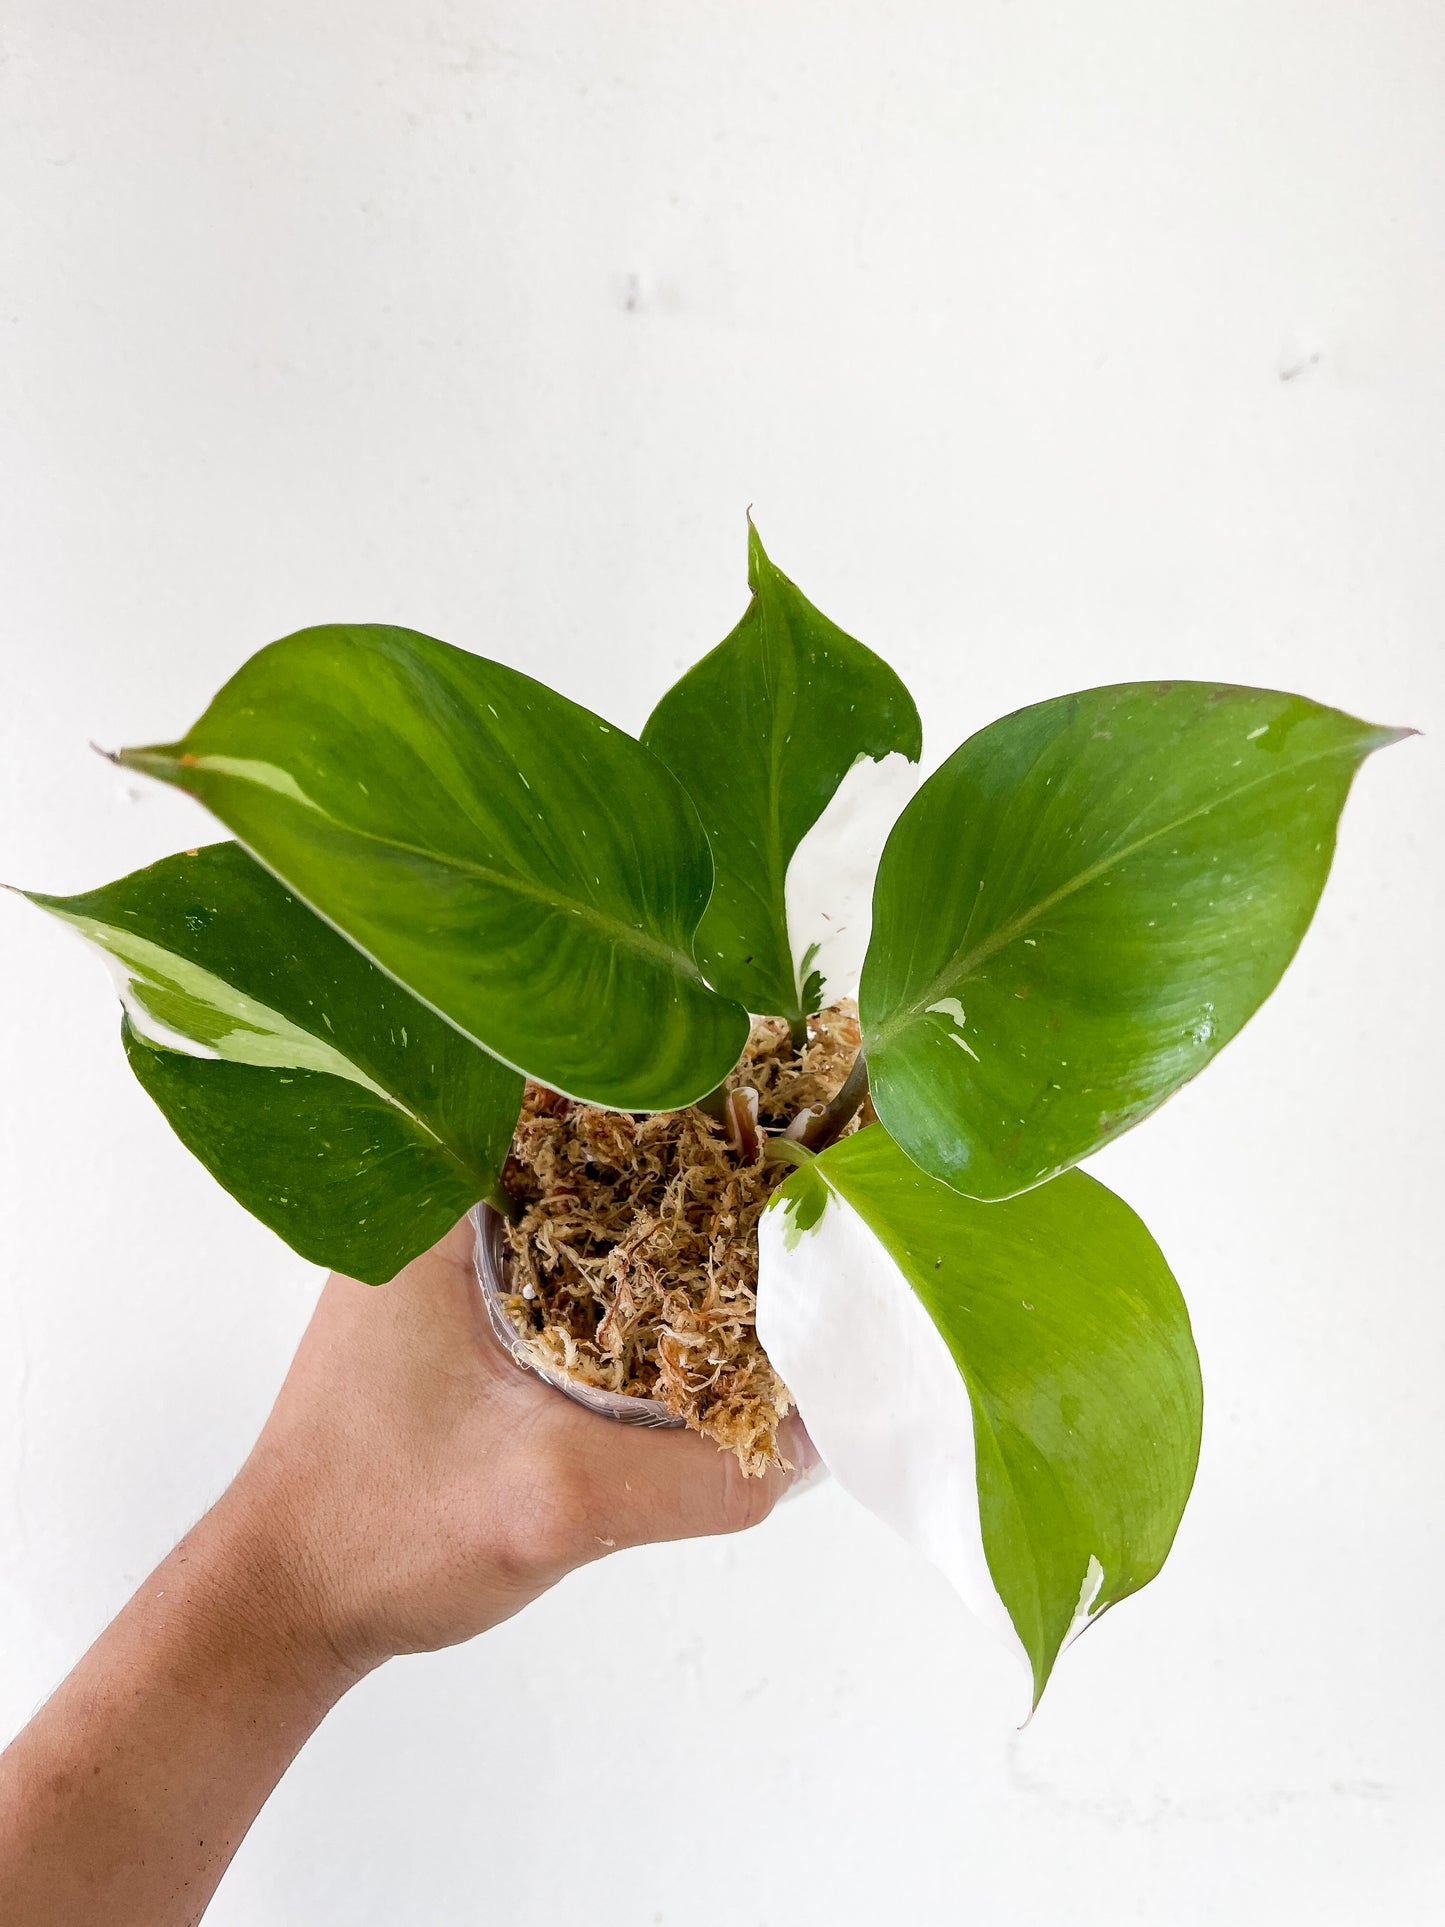 Philodendron White Knight unrooted cutting 1 leaf with 1 growing eye.  (First photo is the mother plant, which is not included in this sale)